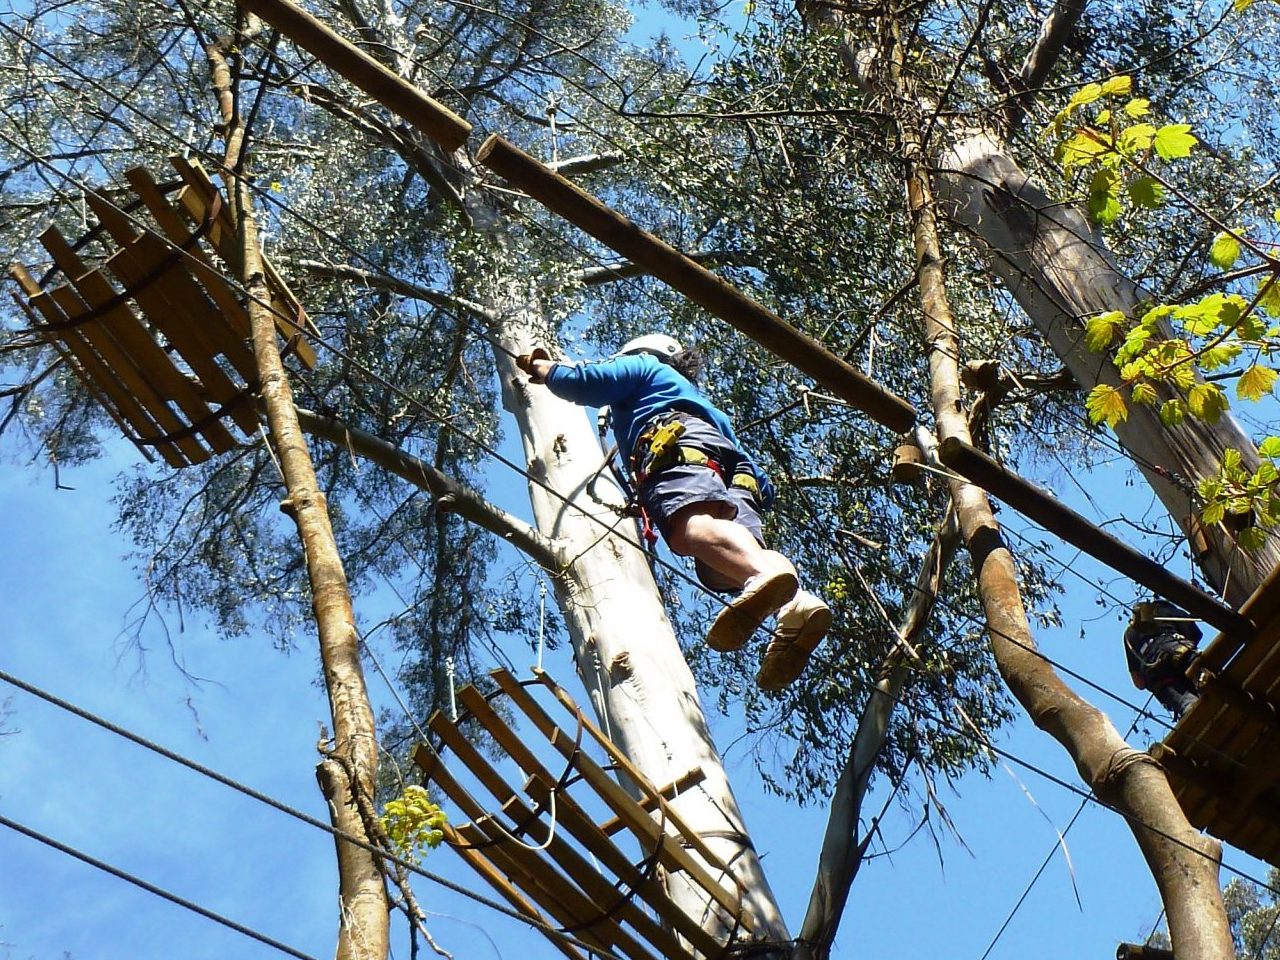 Out Doors Inc participants on a high wire trees program